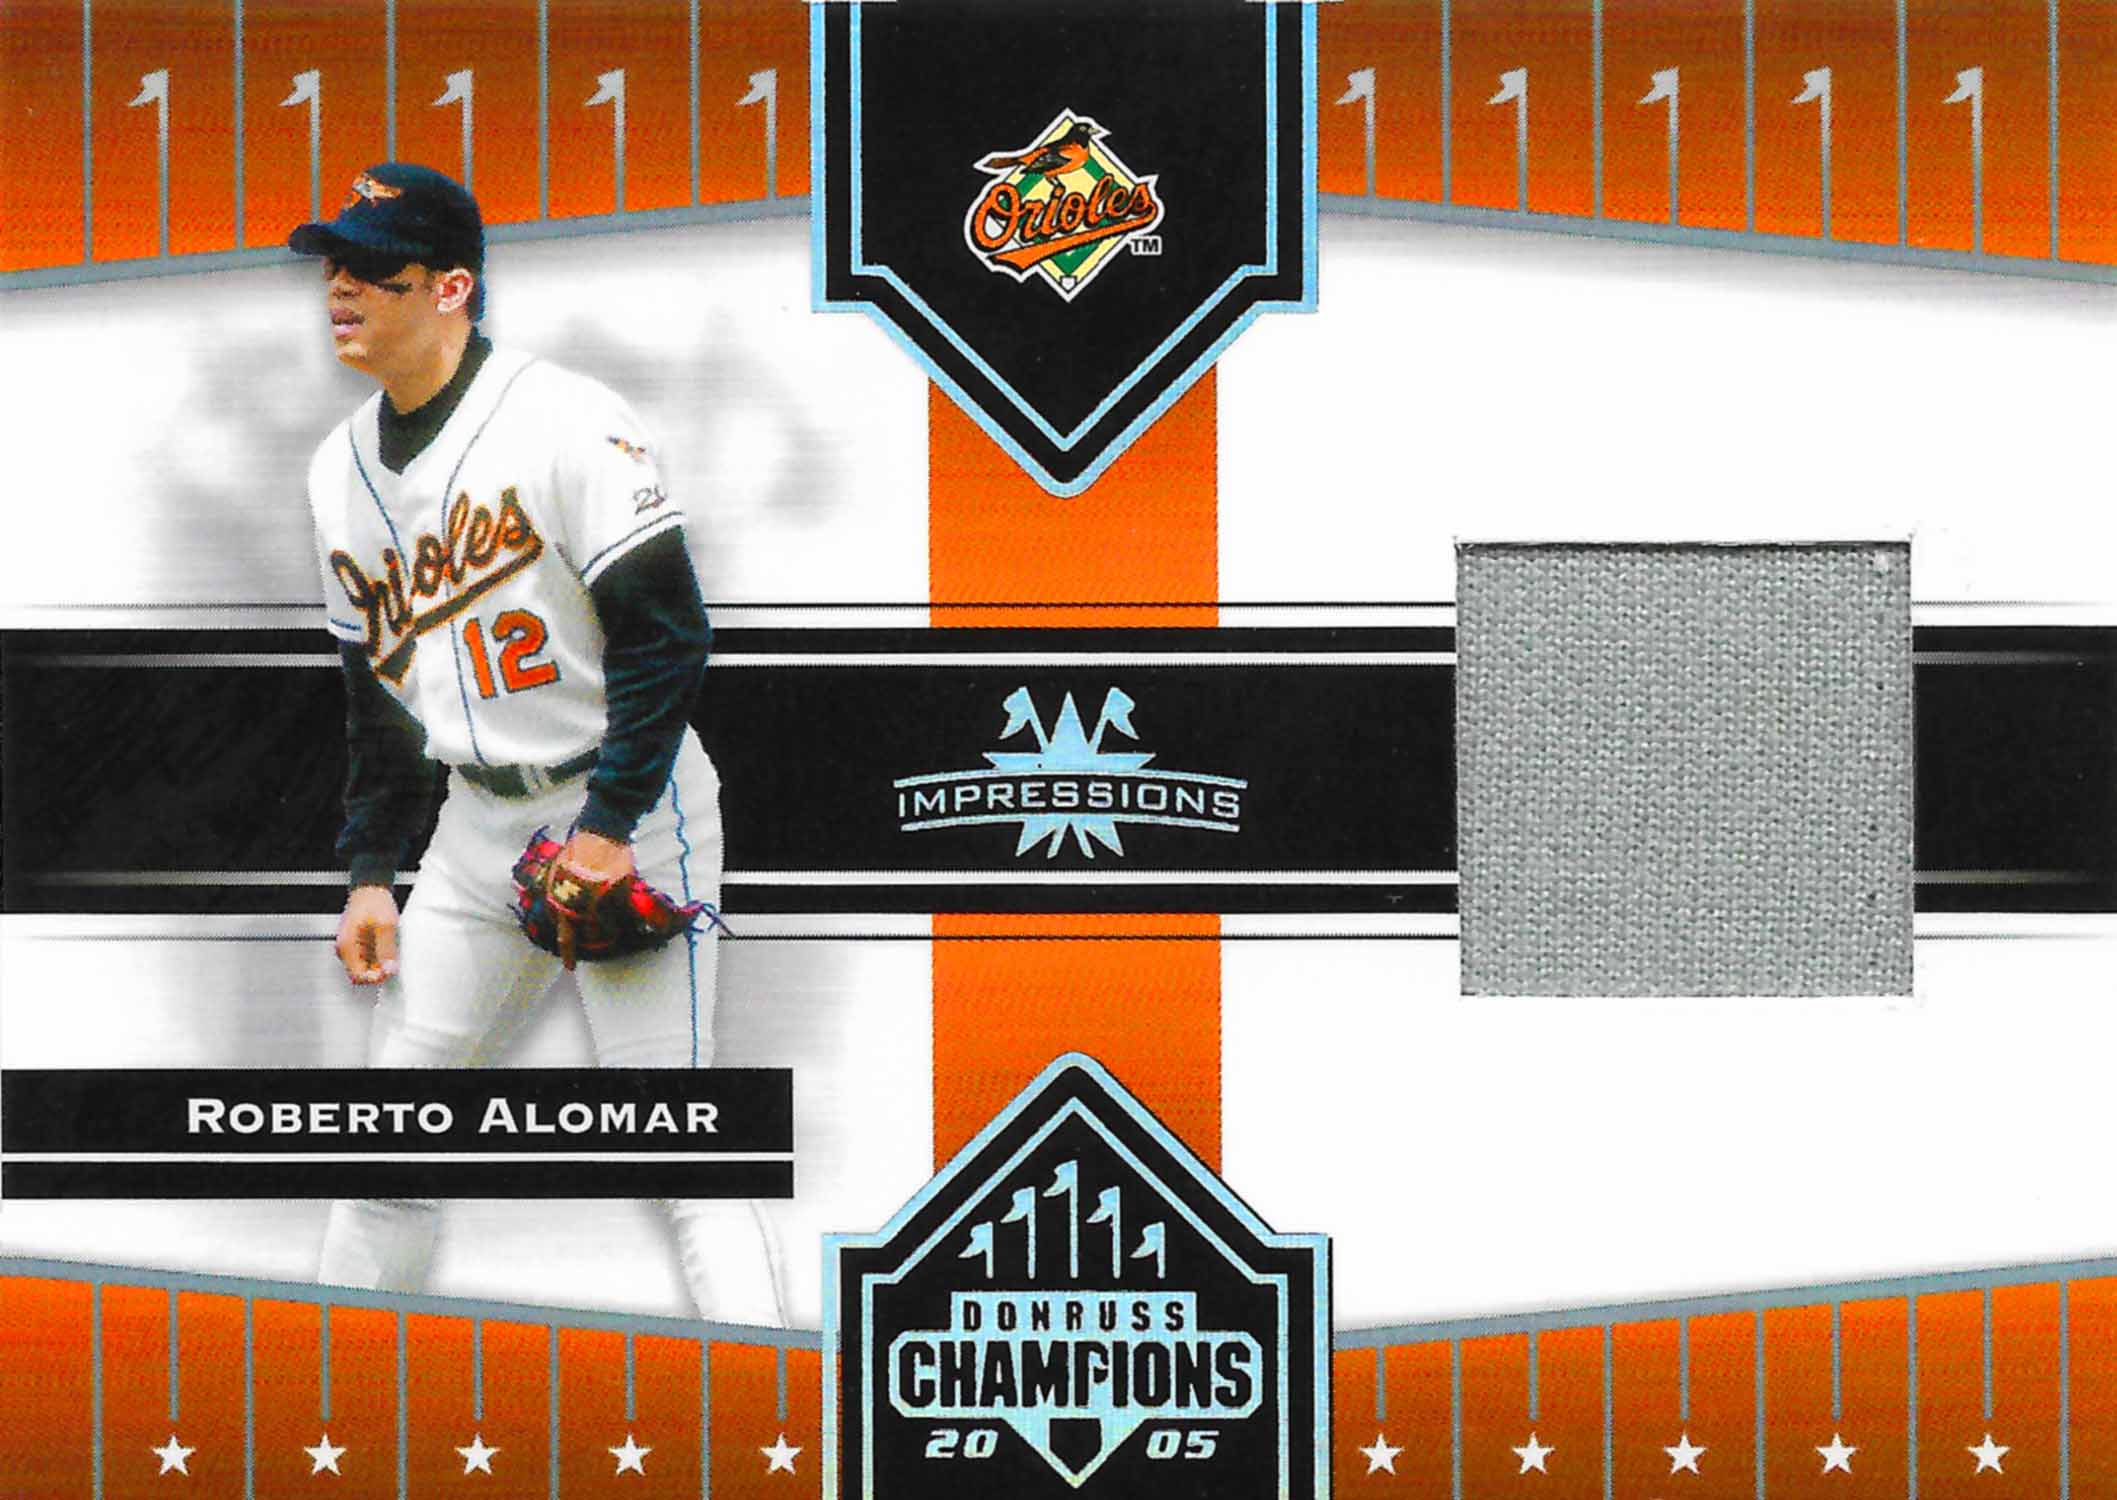 2005 Donruss Champions Impressions Material Jersey